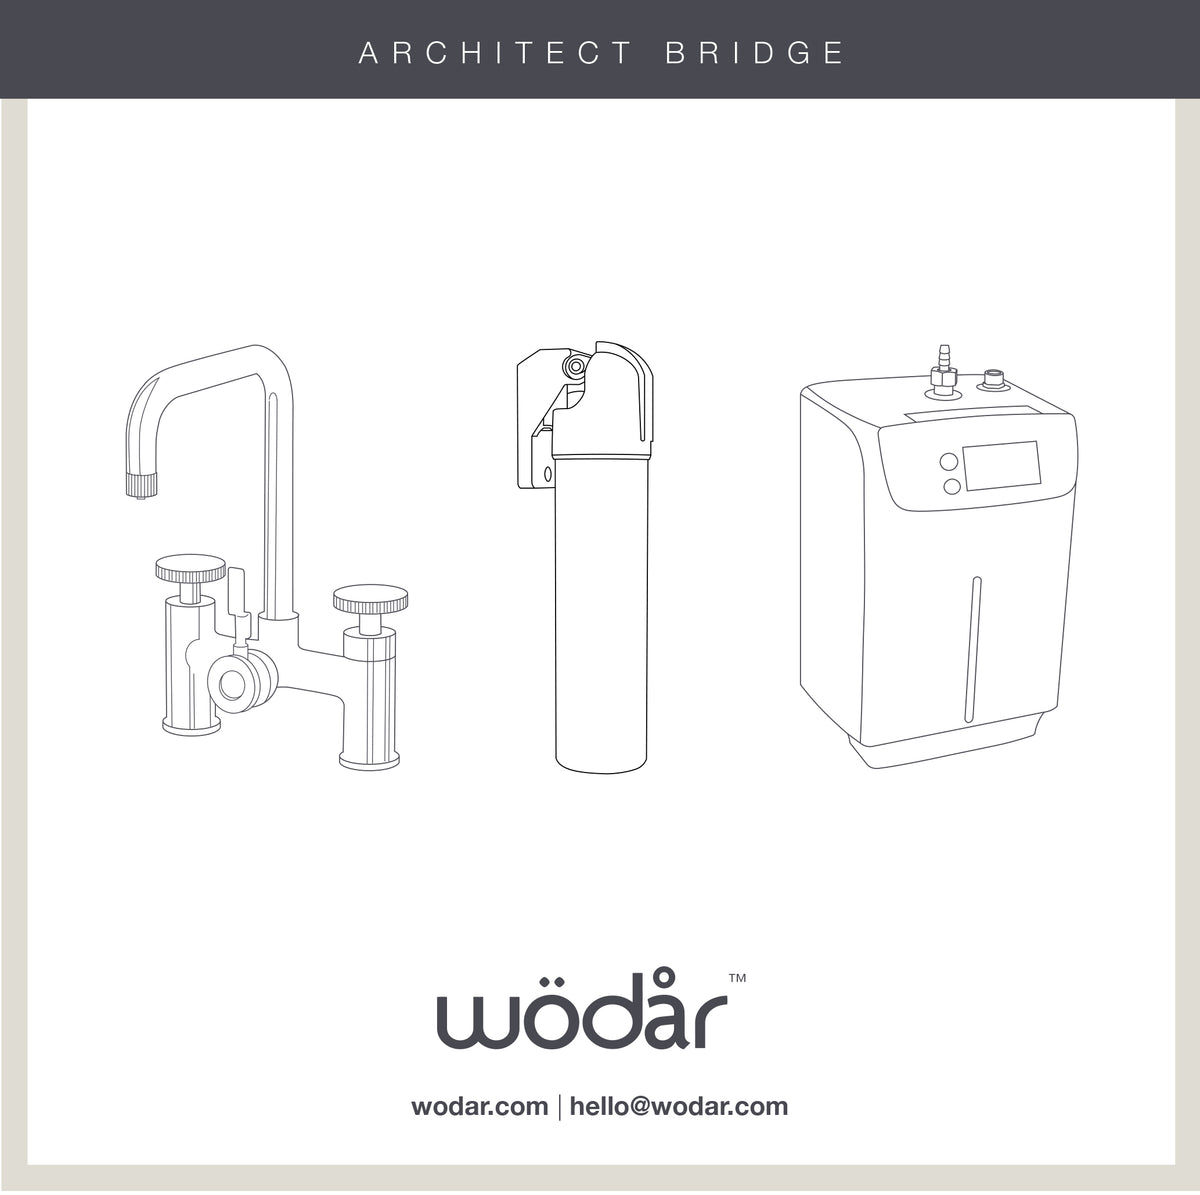 Architect Bridge 3 in 1 Chrome Boiling Hot Water Tap